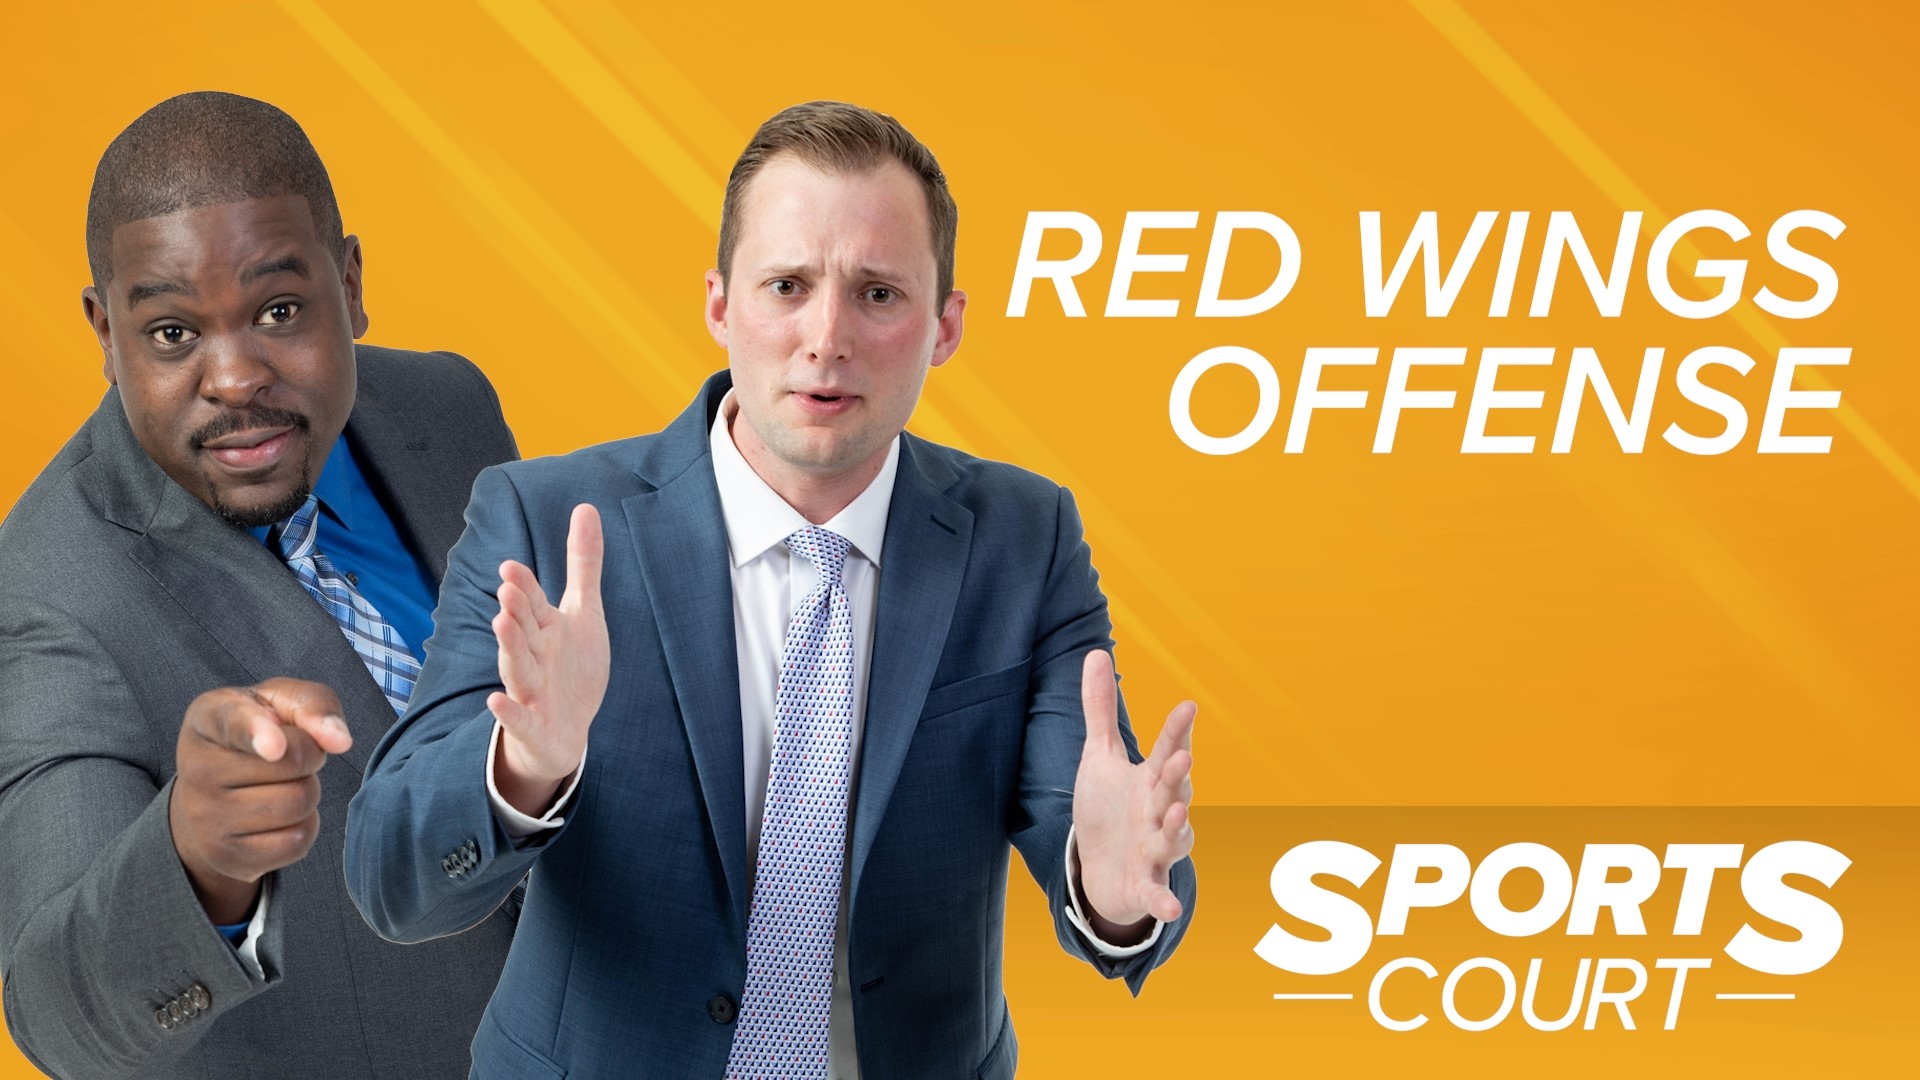 Mark and Jamal argue the case of whether or not the Red Wings can keep their offensive momentum going in Sports Court.